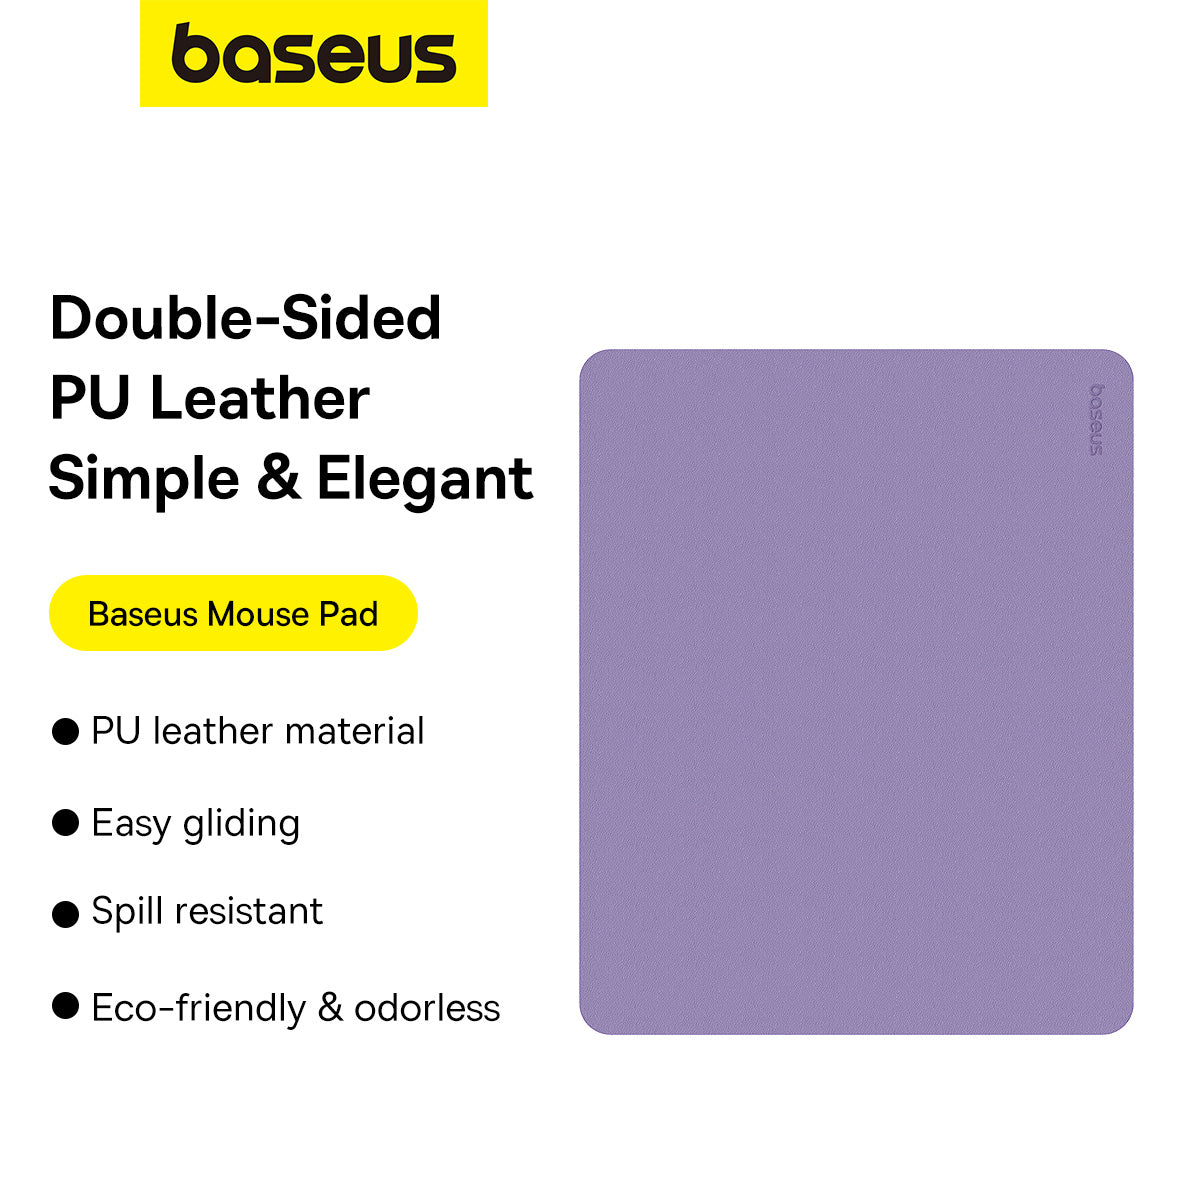 Baseus PU Leather Mouse Pad Waterproof Coating Eco-friendly Napa Grain 210 x 260 mm for Mouse Mice